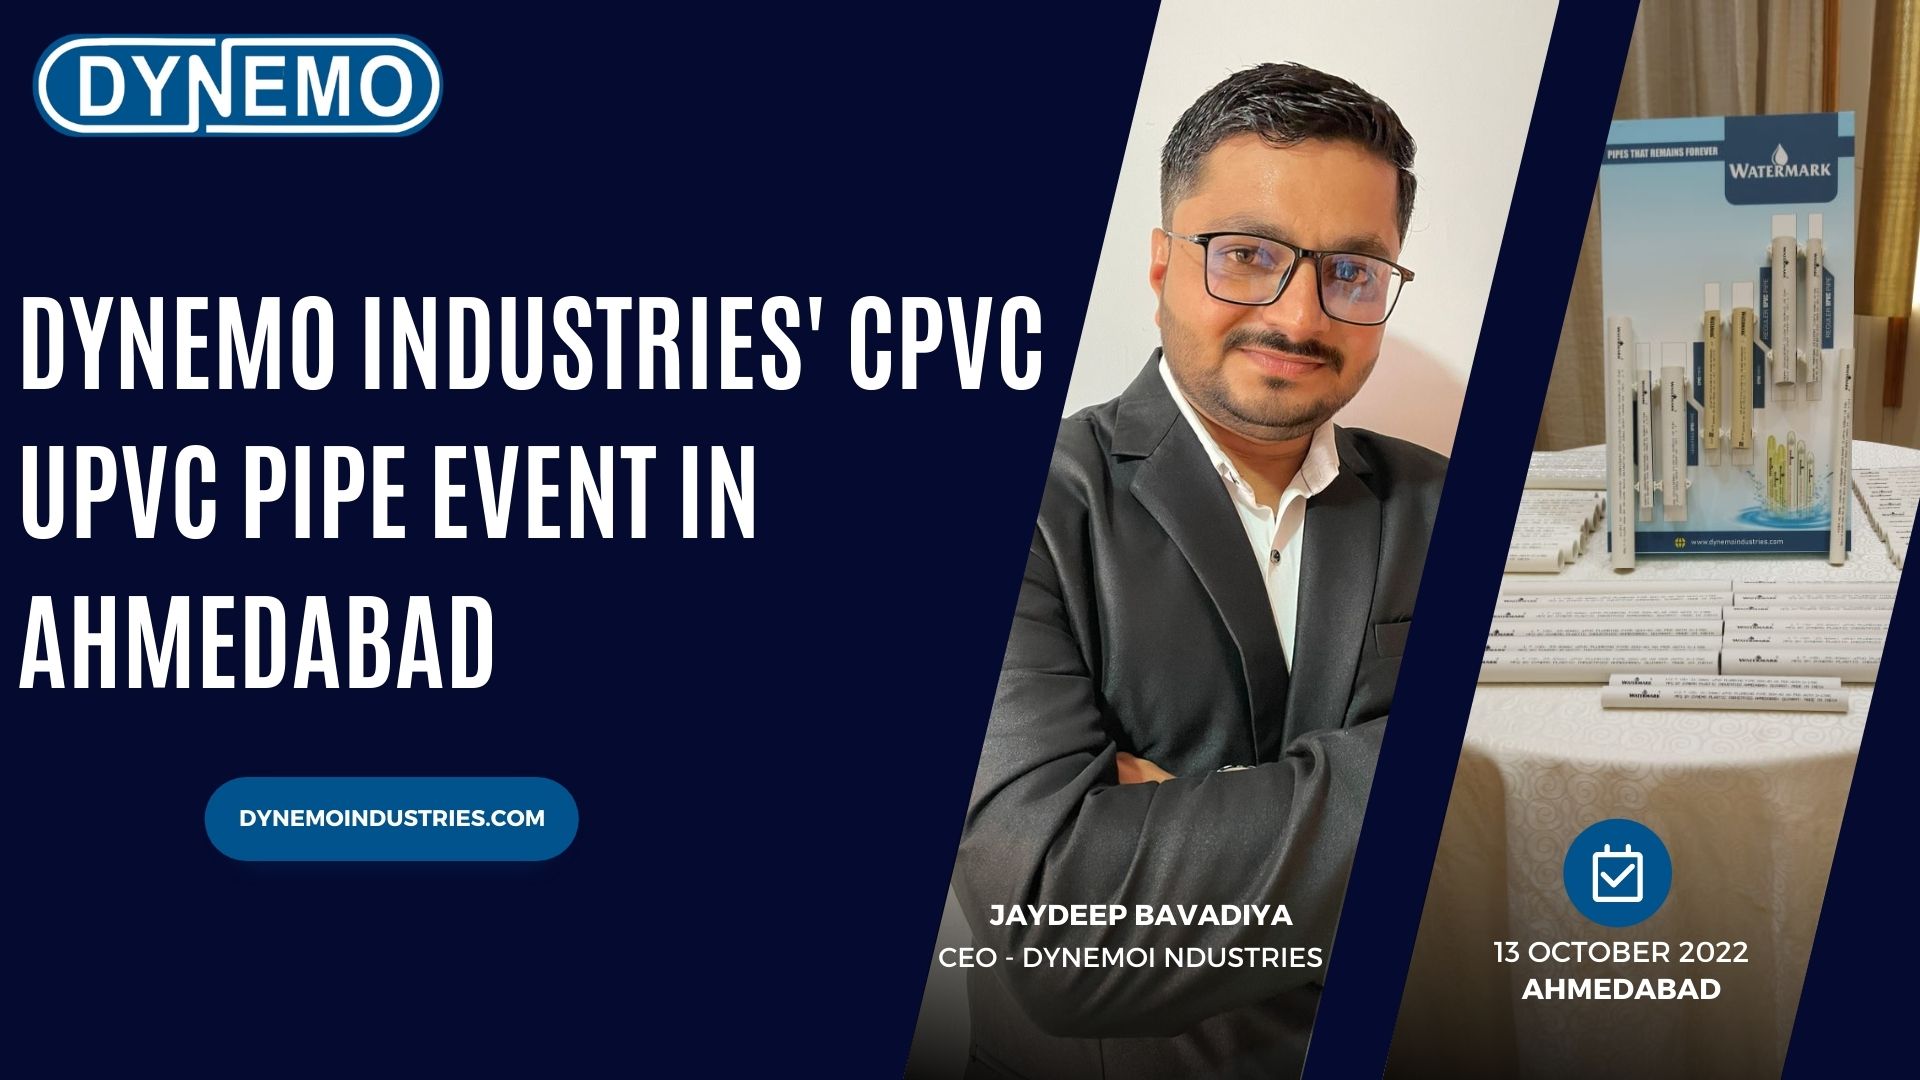 Dynemo Industries’ PVC, CPVC, UPVC Pipe Event in Ahmedabad